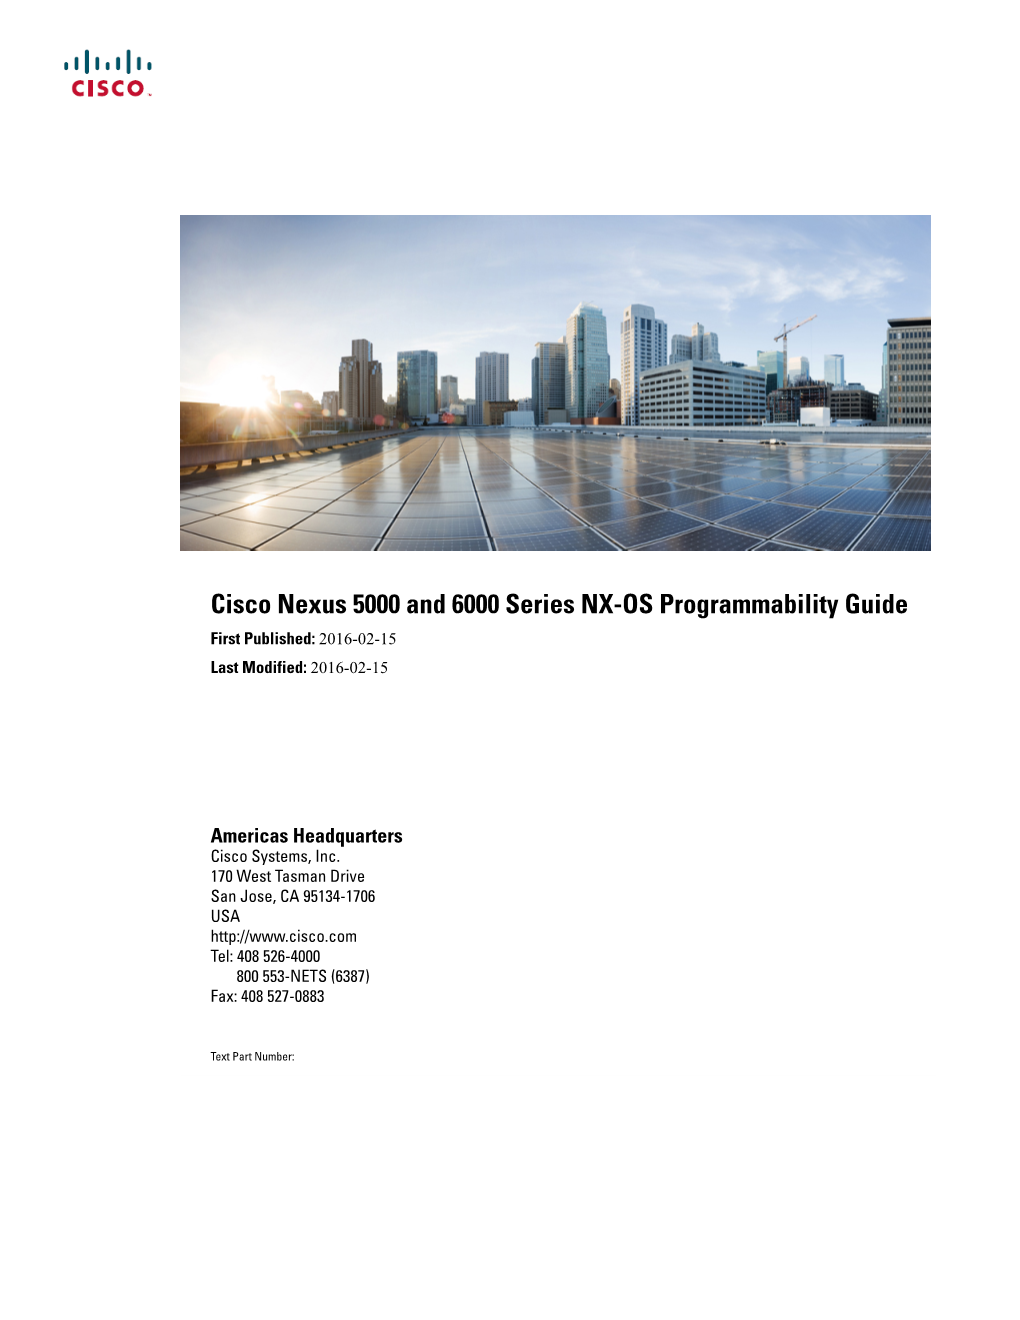 Cisco Nexus 5000 and 6000 Series NX-OS Programmability Guide First Published: 2016-02-15 Last Modified: 2016-02-15